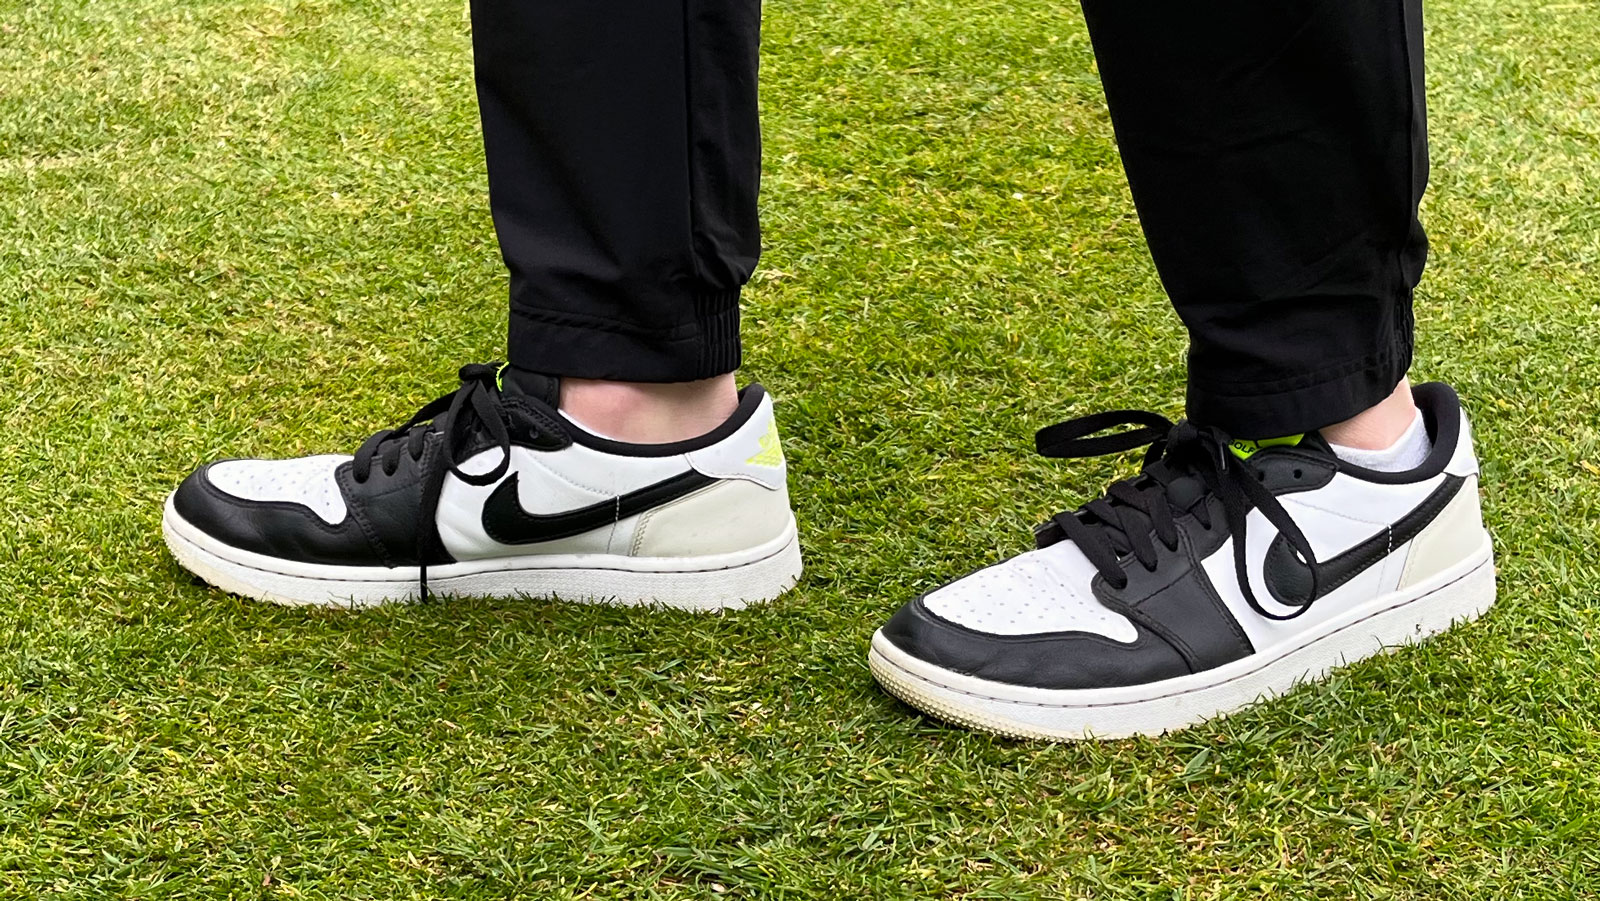 The Nike Air Jordan 1 Low golf shoe pictured on a tee box